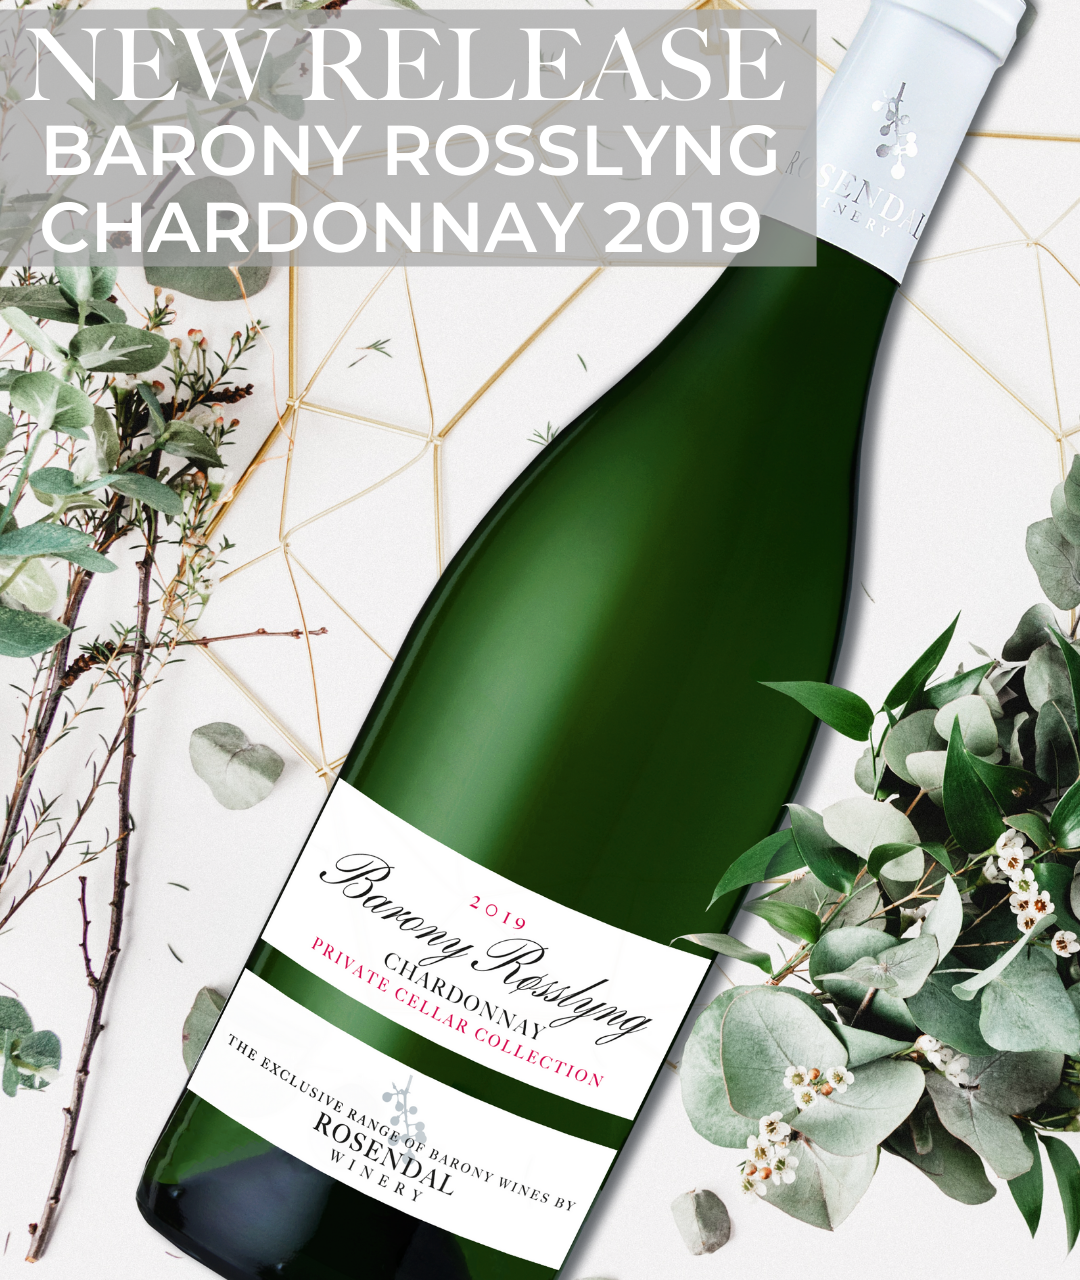 Barony Røsslyng: A lightly wooded Chardonnay